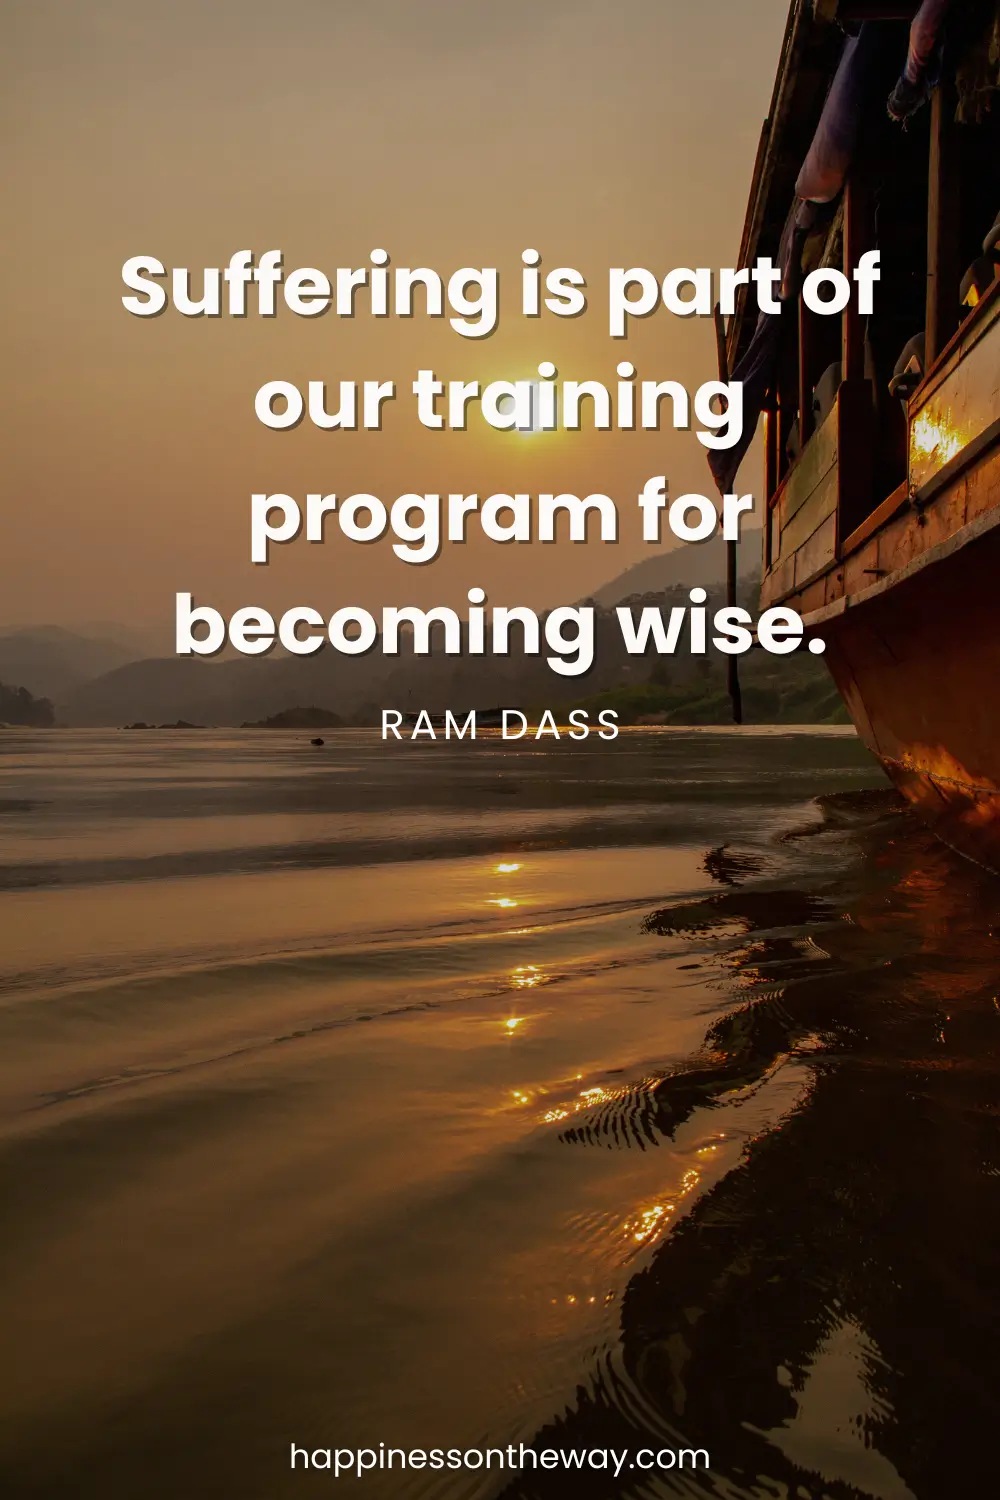 A serene river at sunset witha slow travel quote 'Suffering is part of our training program for becoming wise. – Ram Dass